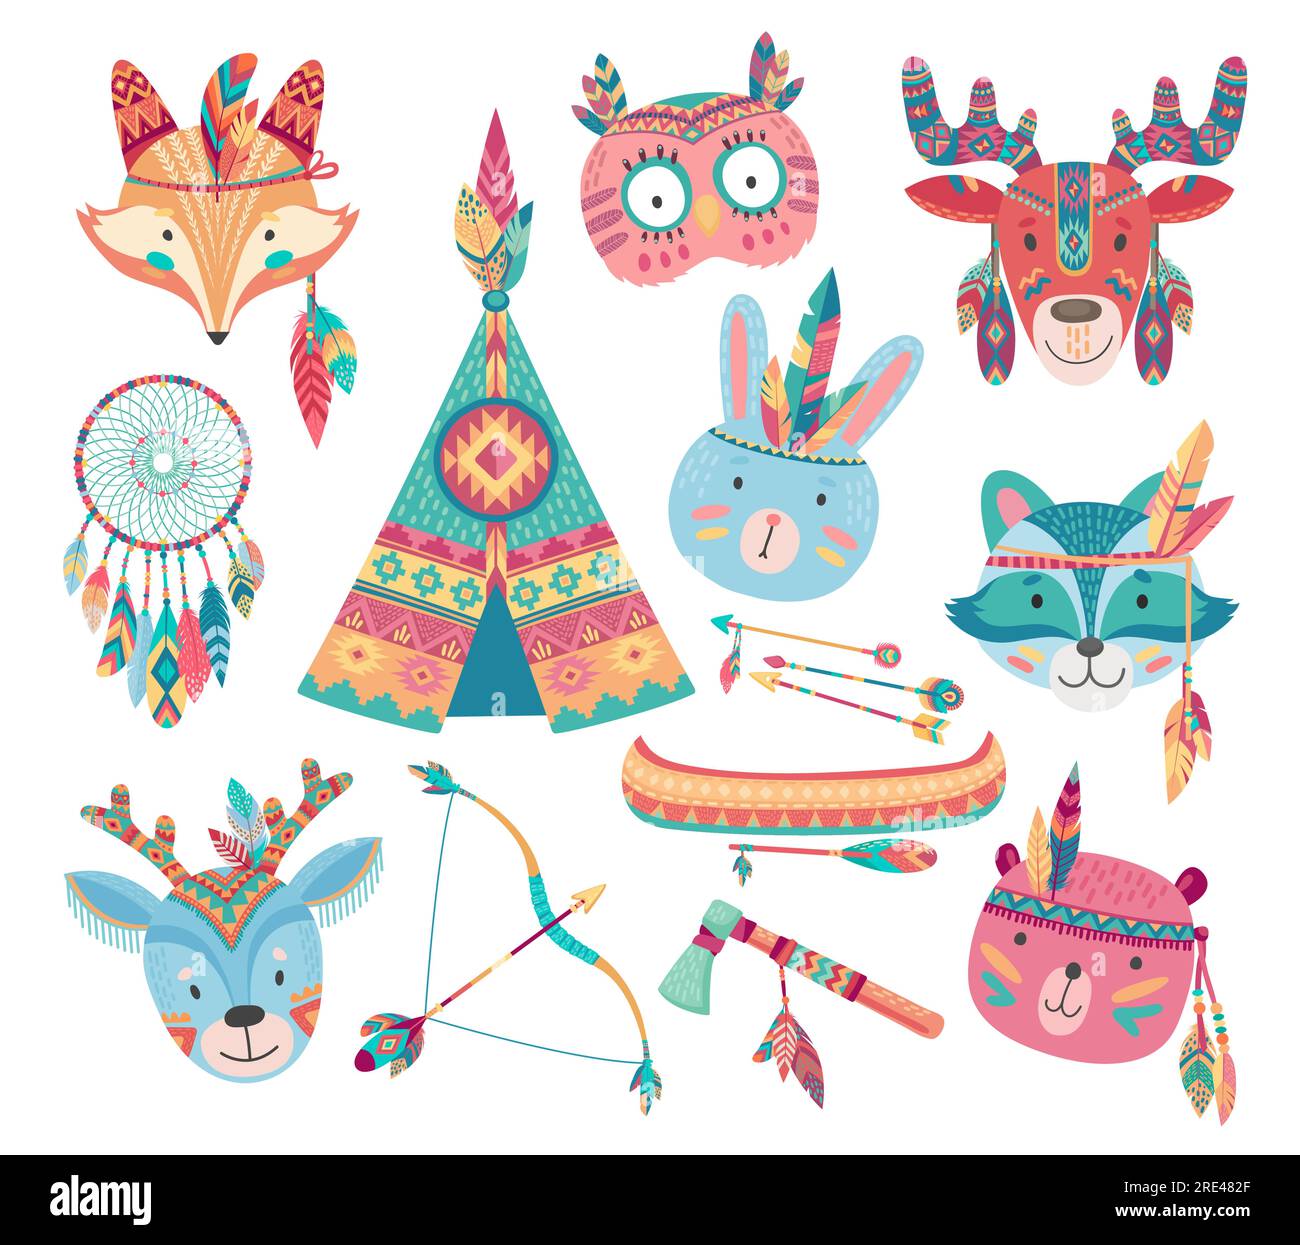 Cute native american or indian animal vector icons with tribal feather headdresses, arrows, dream catcher and tepee, bow, tomahawk, canoe. Baby bear, rabbit or bunny, fox, owl, racoon and deer faces Stock Vector